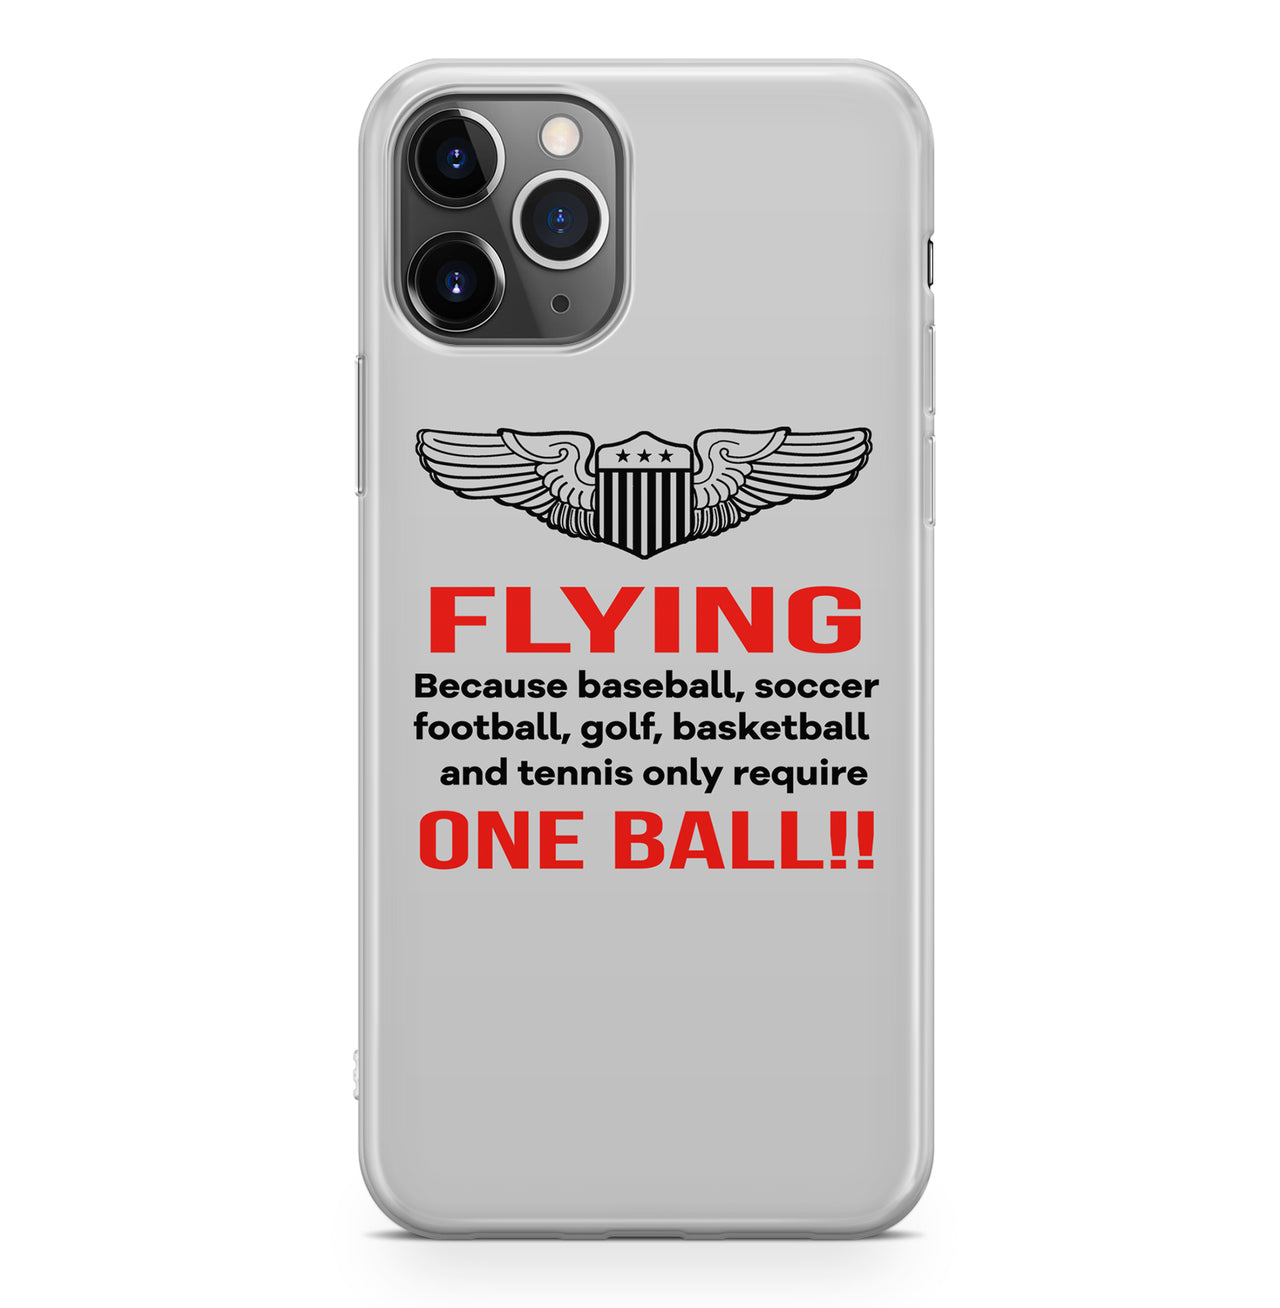 Flying One Ball Designed iPhone Cases